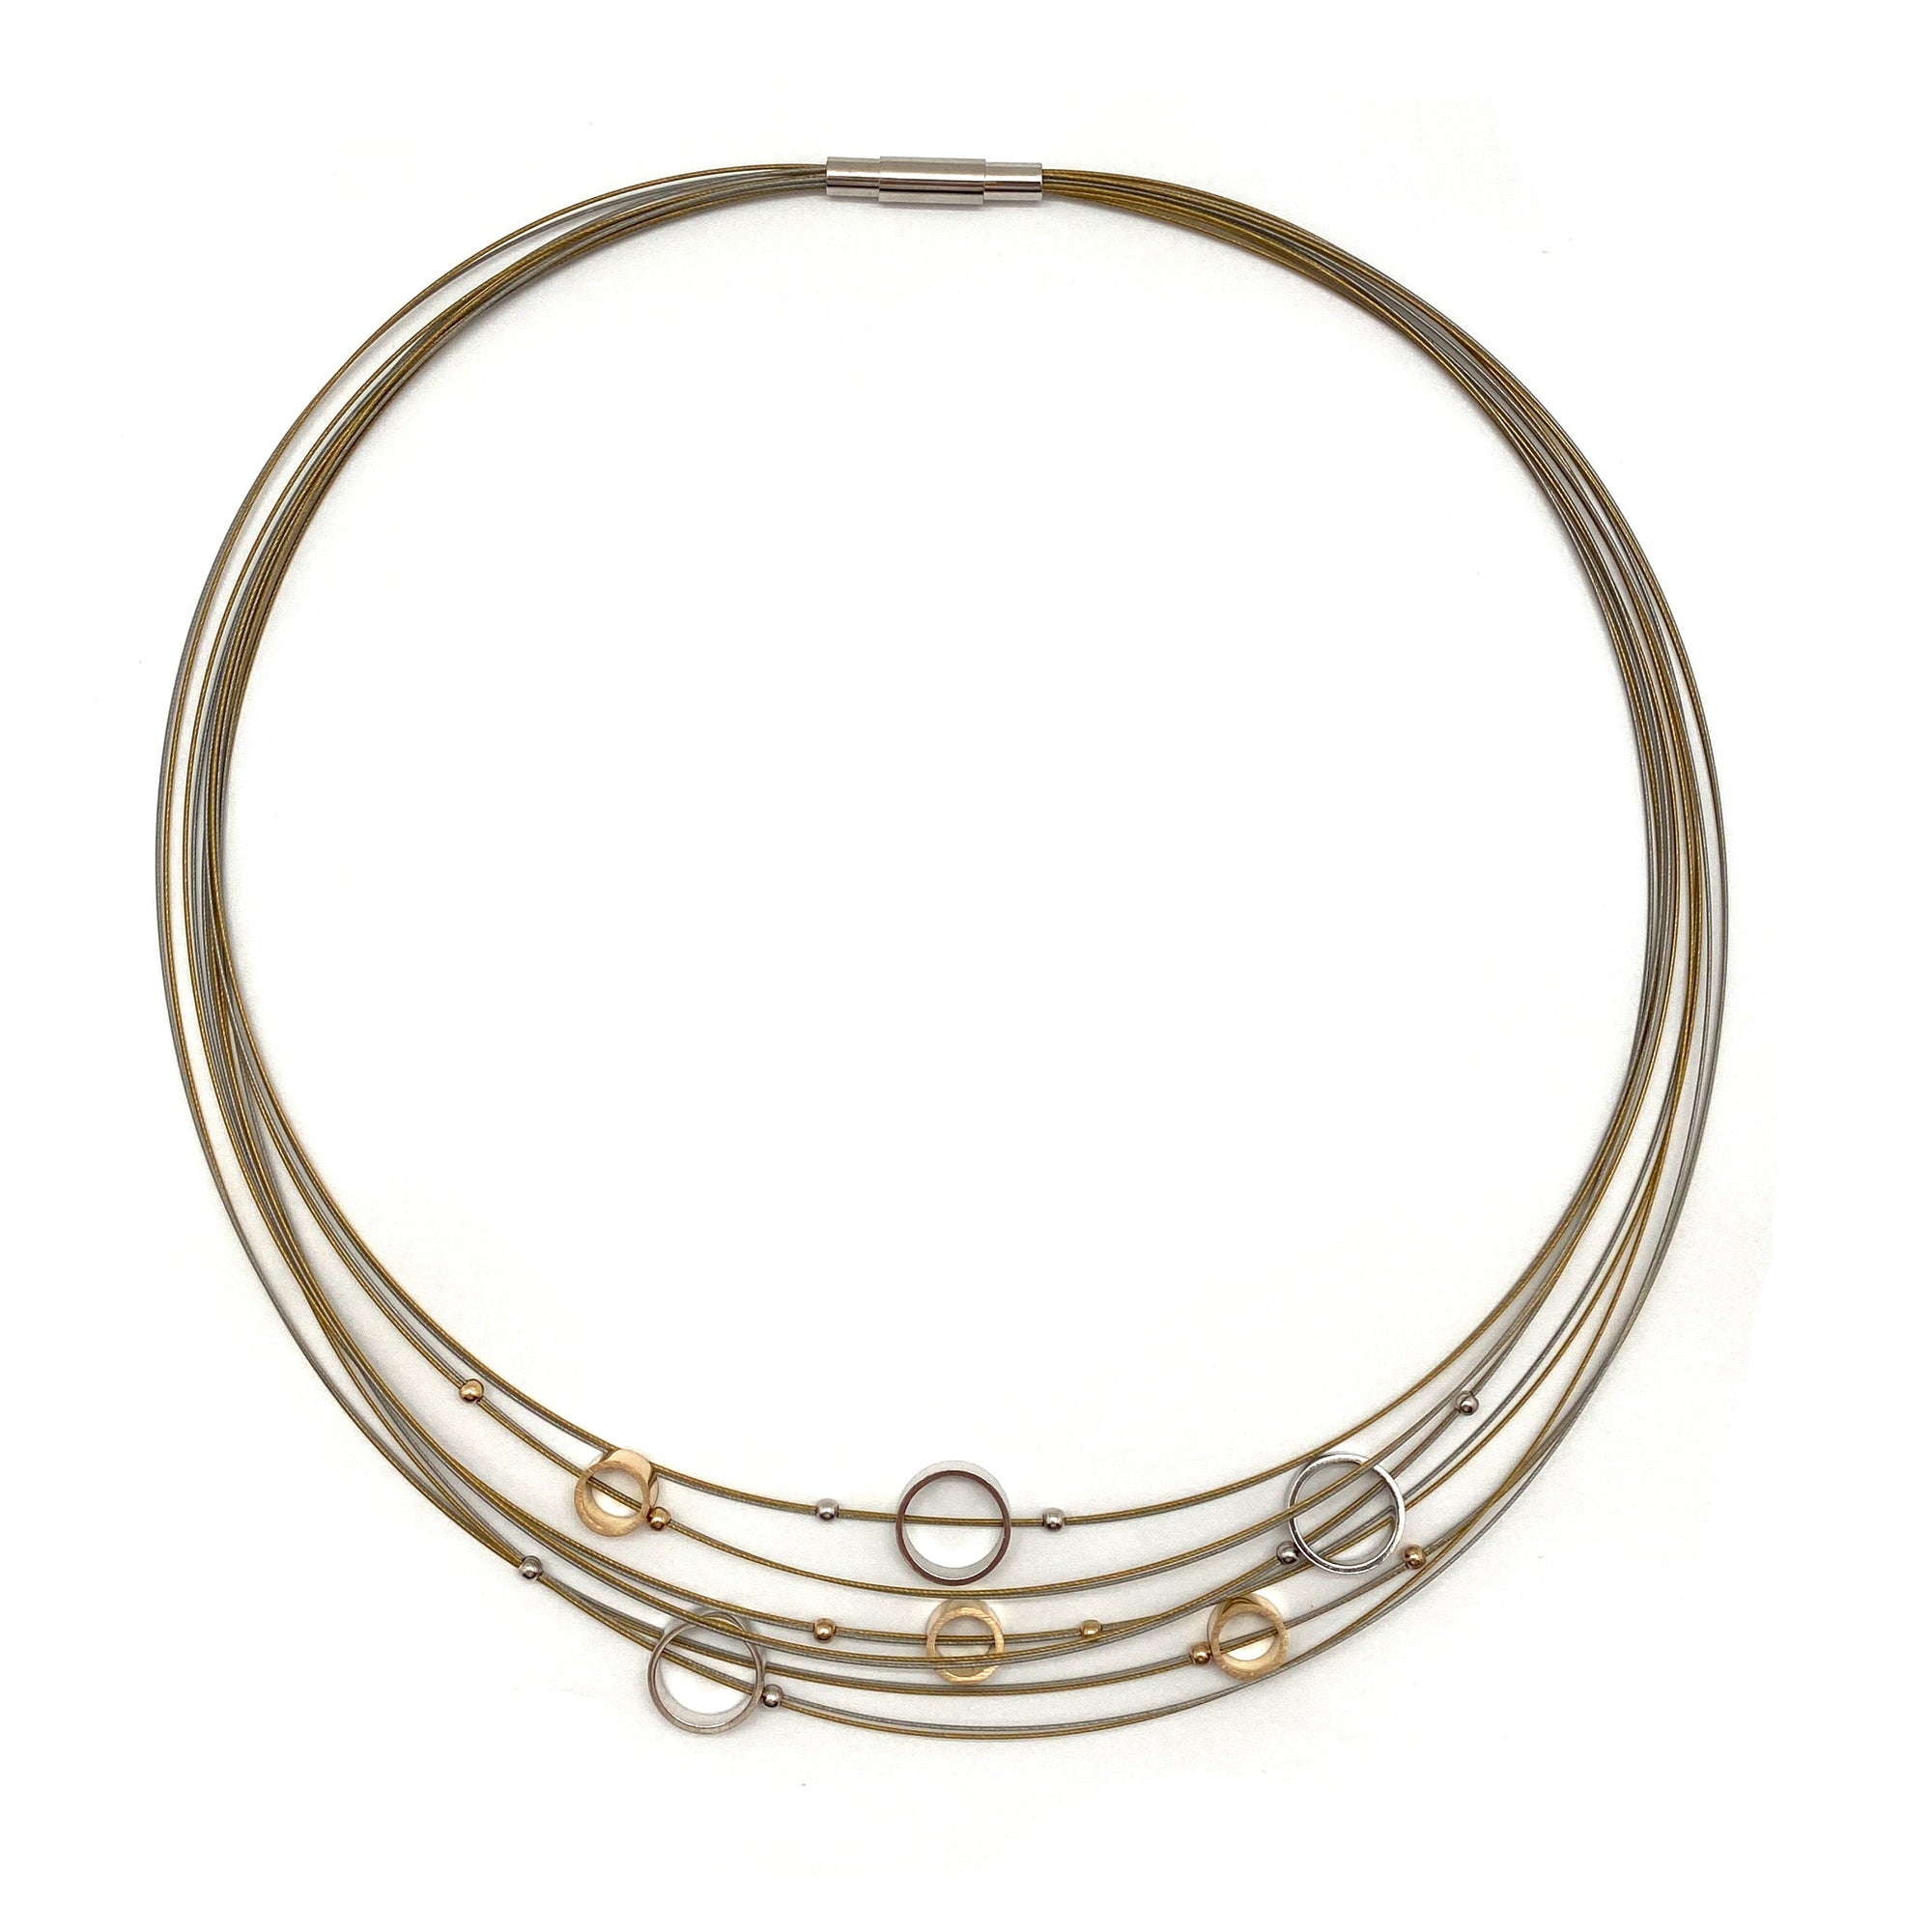 Circular Gold and Silver Steel Cable Necklace-Necklaces-Bernd Schmid-Pistachios